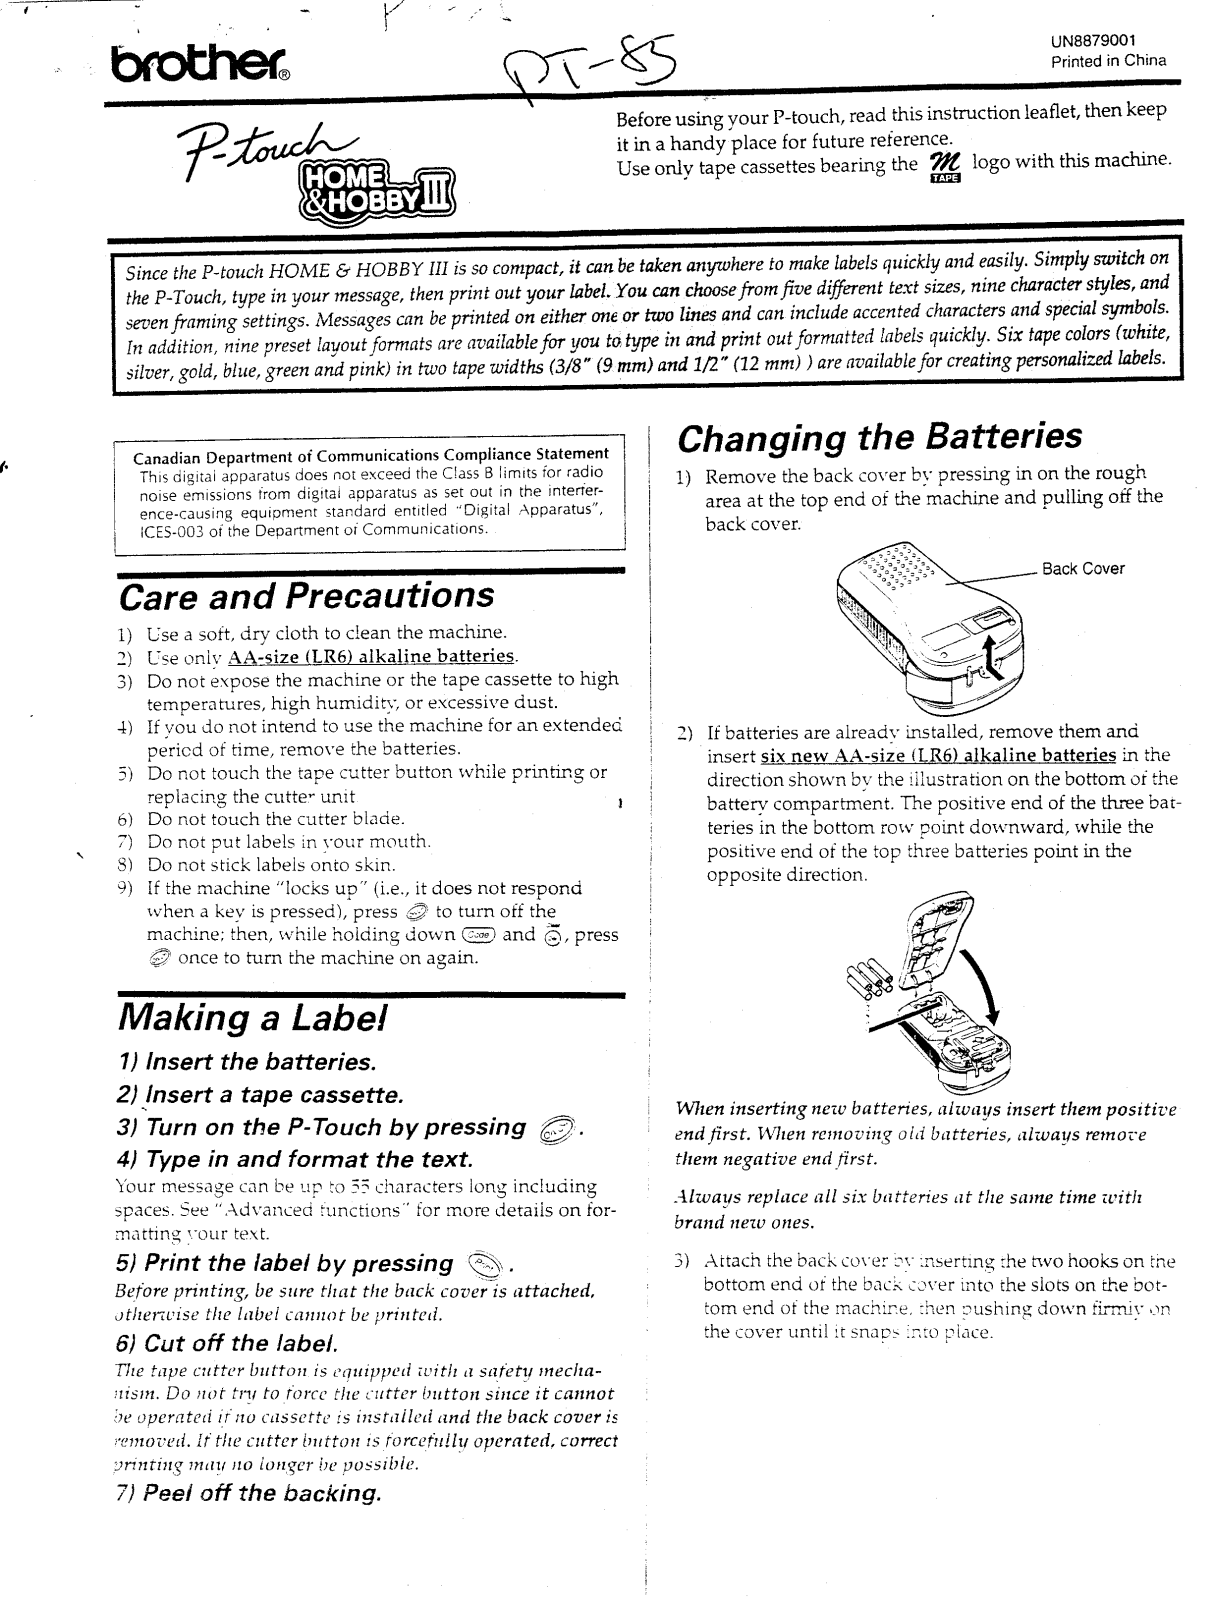 Brother PT-85 User Manual